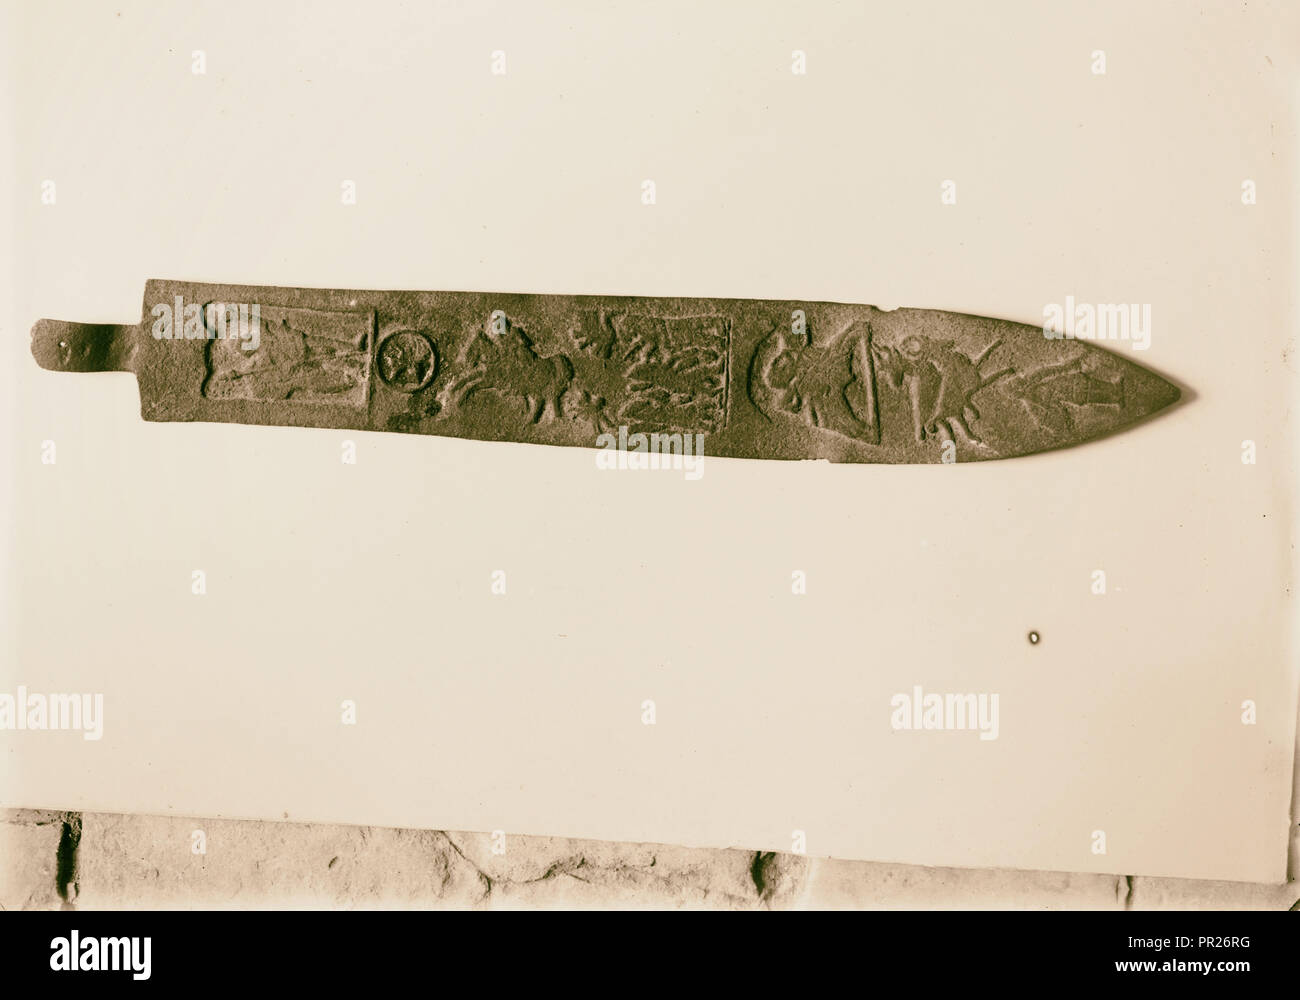 Inscribed ceremonial knife 1898, Middle East, Israel and/or Palestine Stock Photo